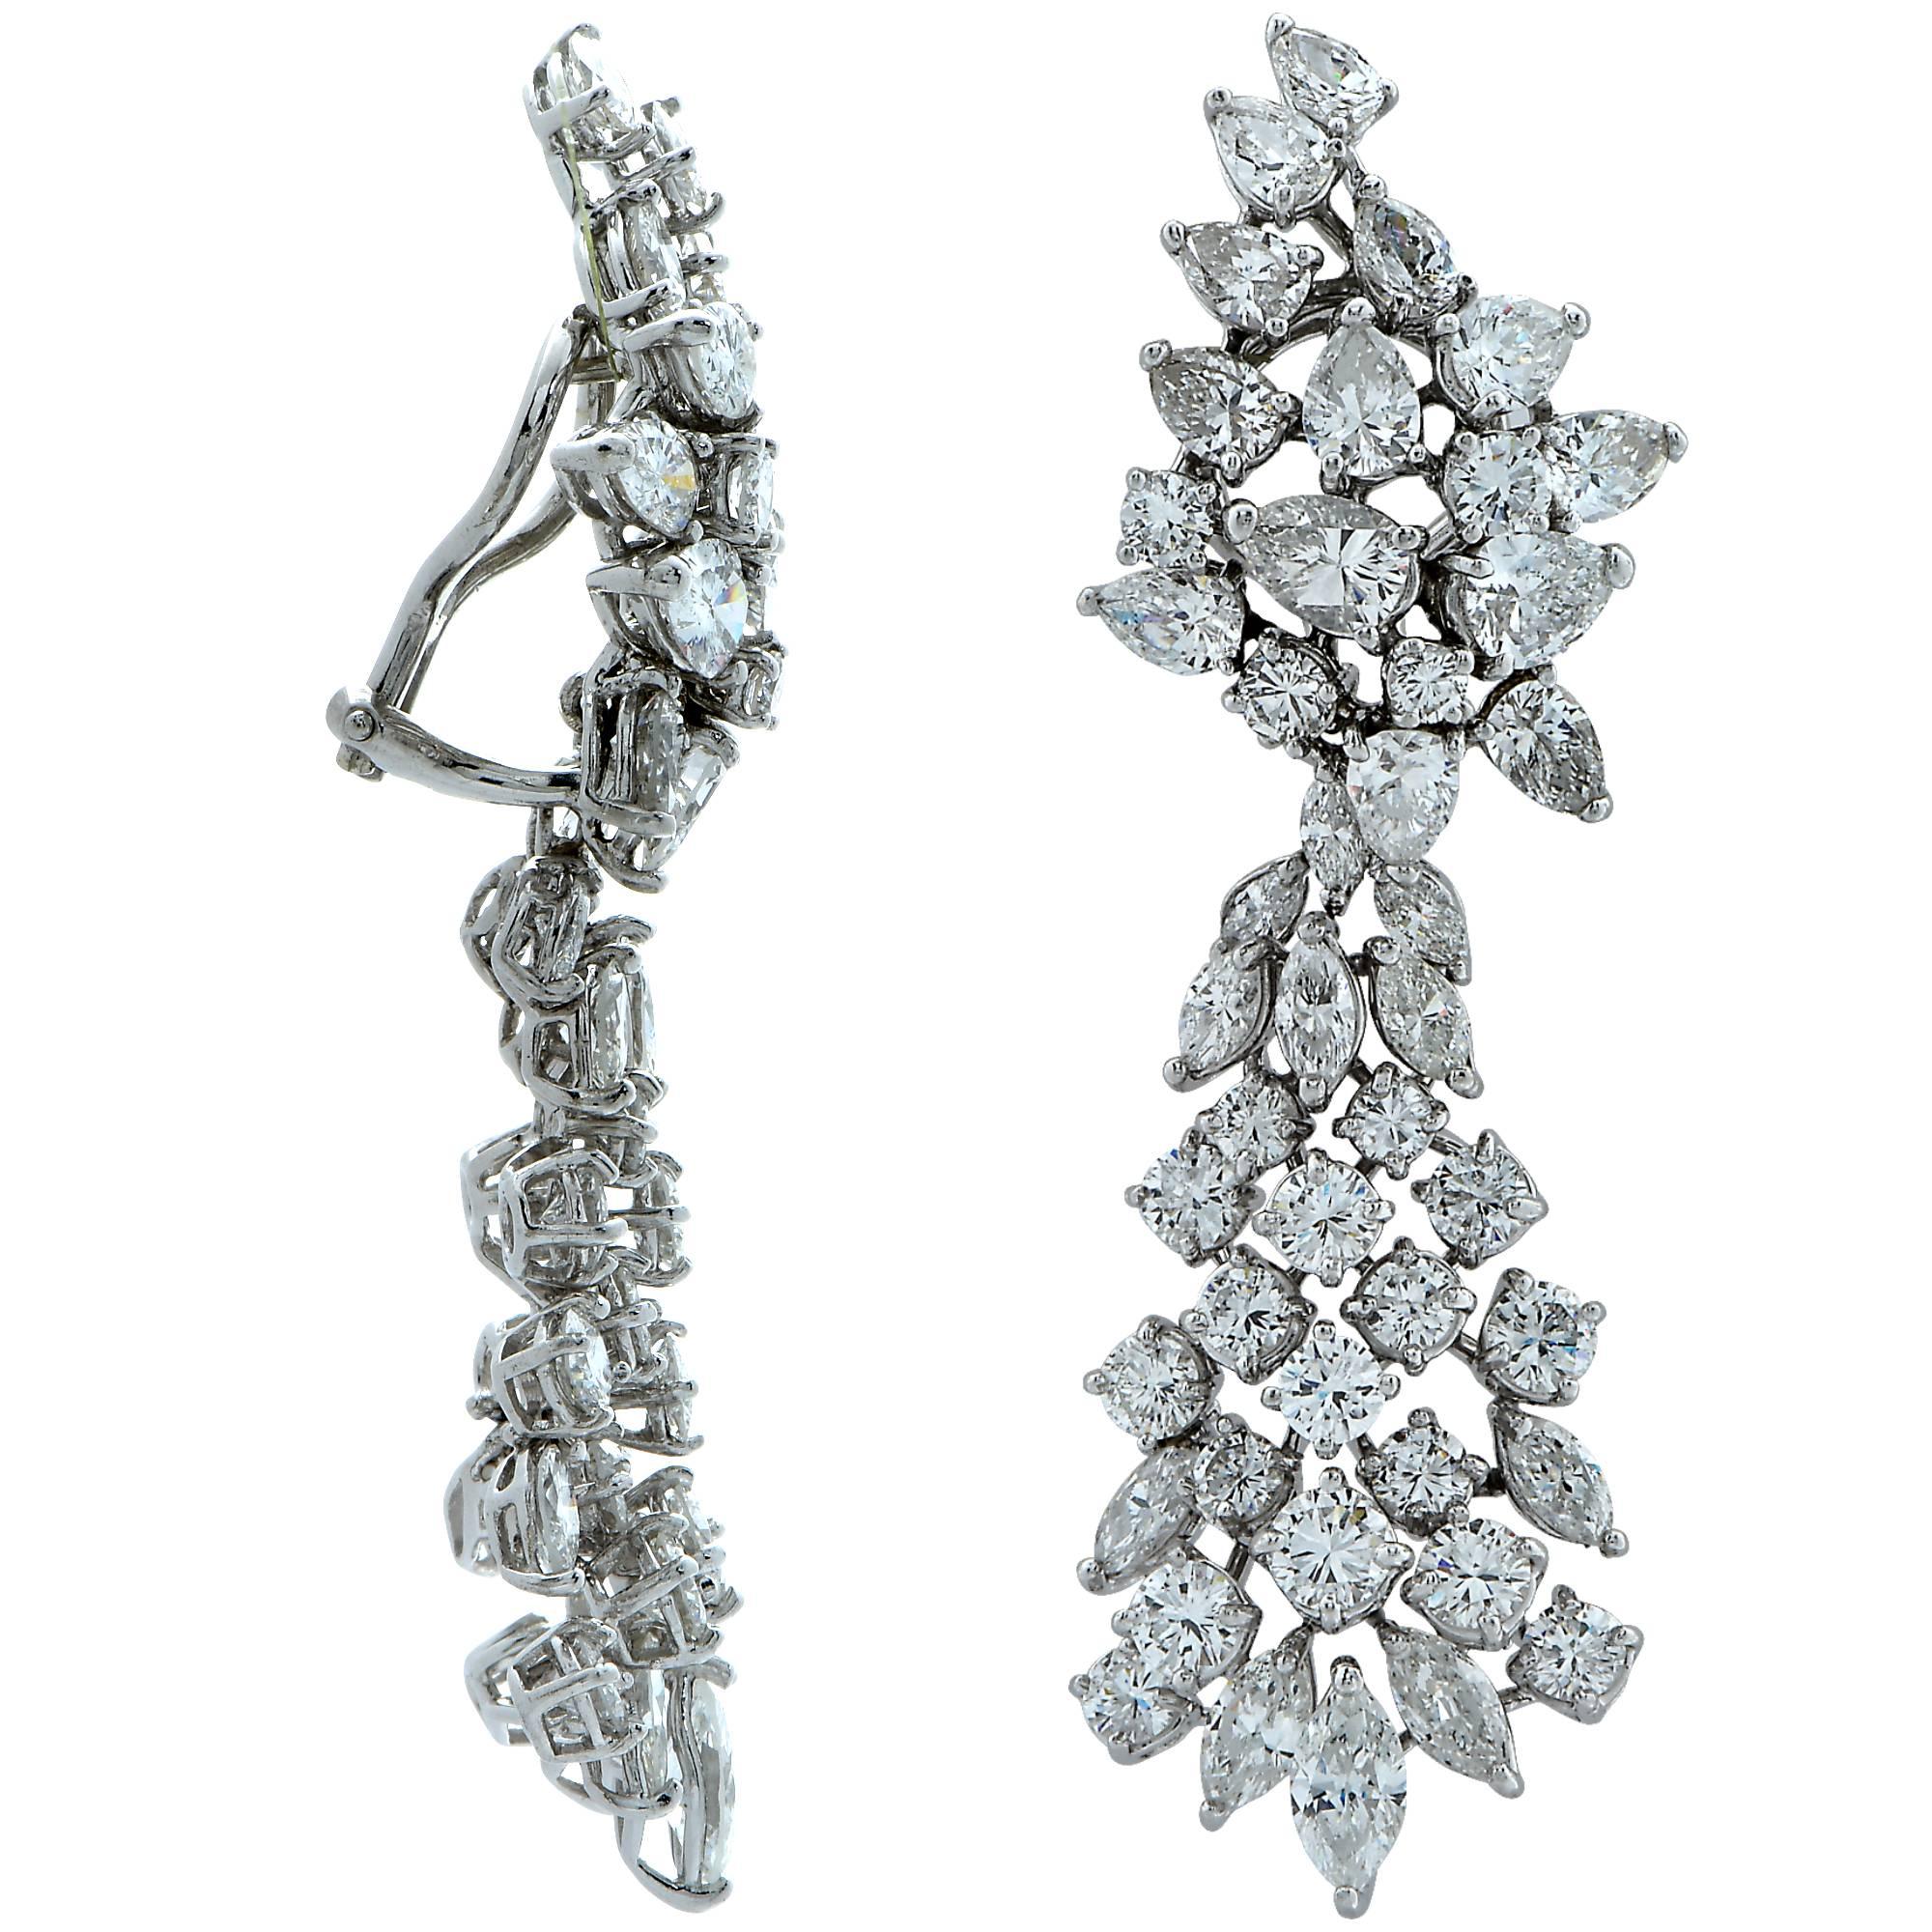 Spectacular dangle diamond earrings crafted in platinum, featuring mixed cut diamonds weighing approximately 21 carats total, F-H color and VS-SI clarity. Diamond drops dazzle with movement in a stunning display of brilliance and fire as they